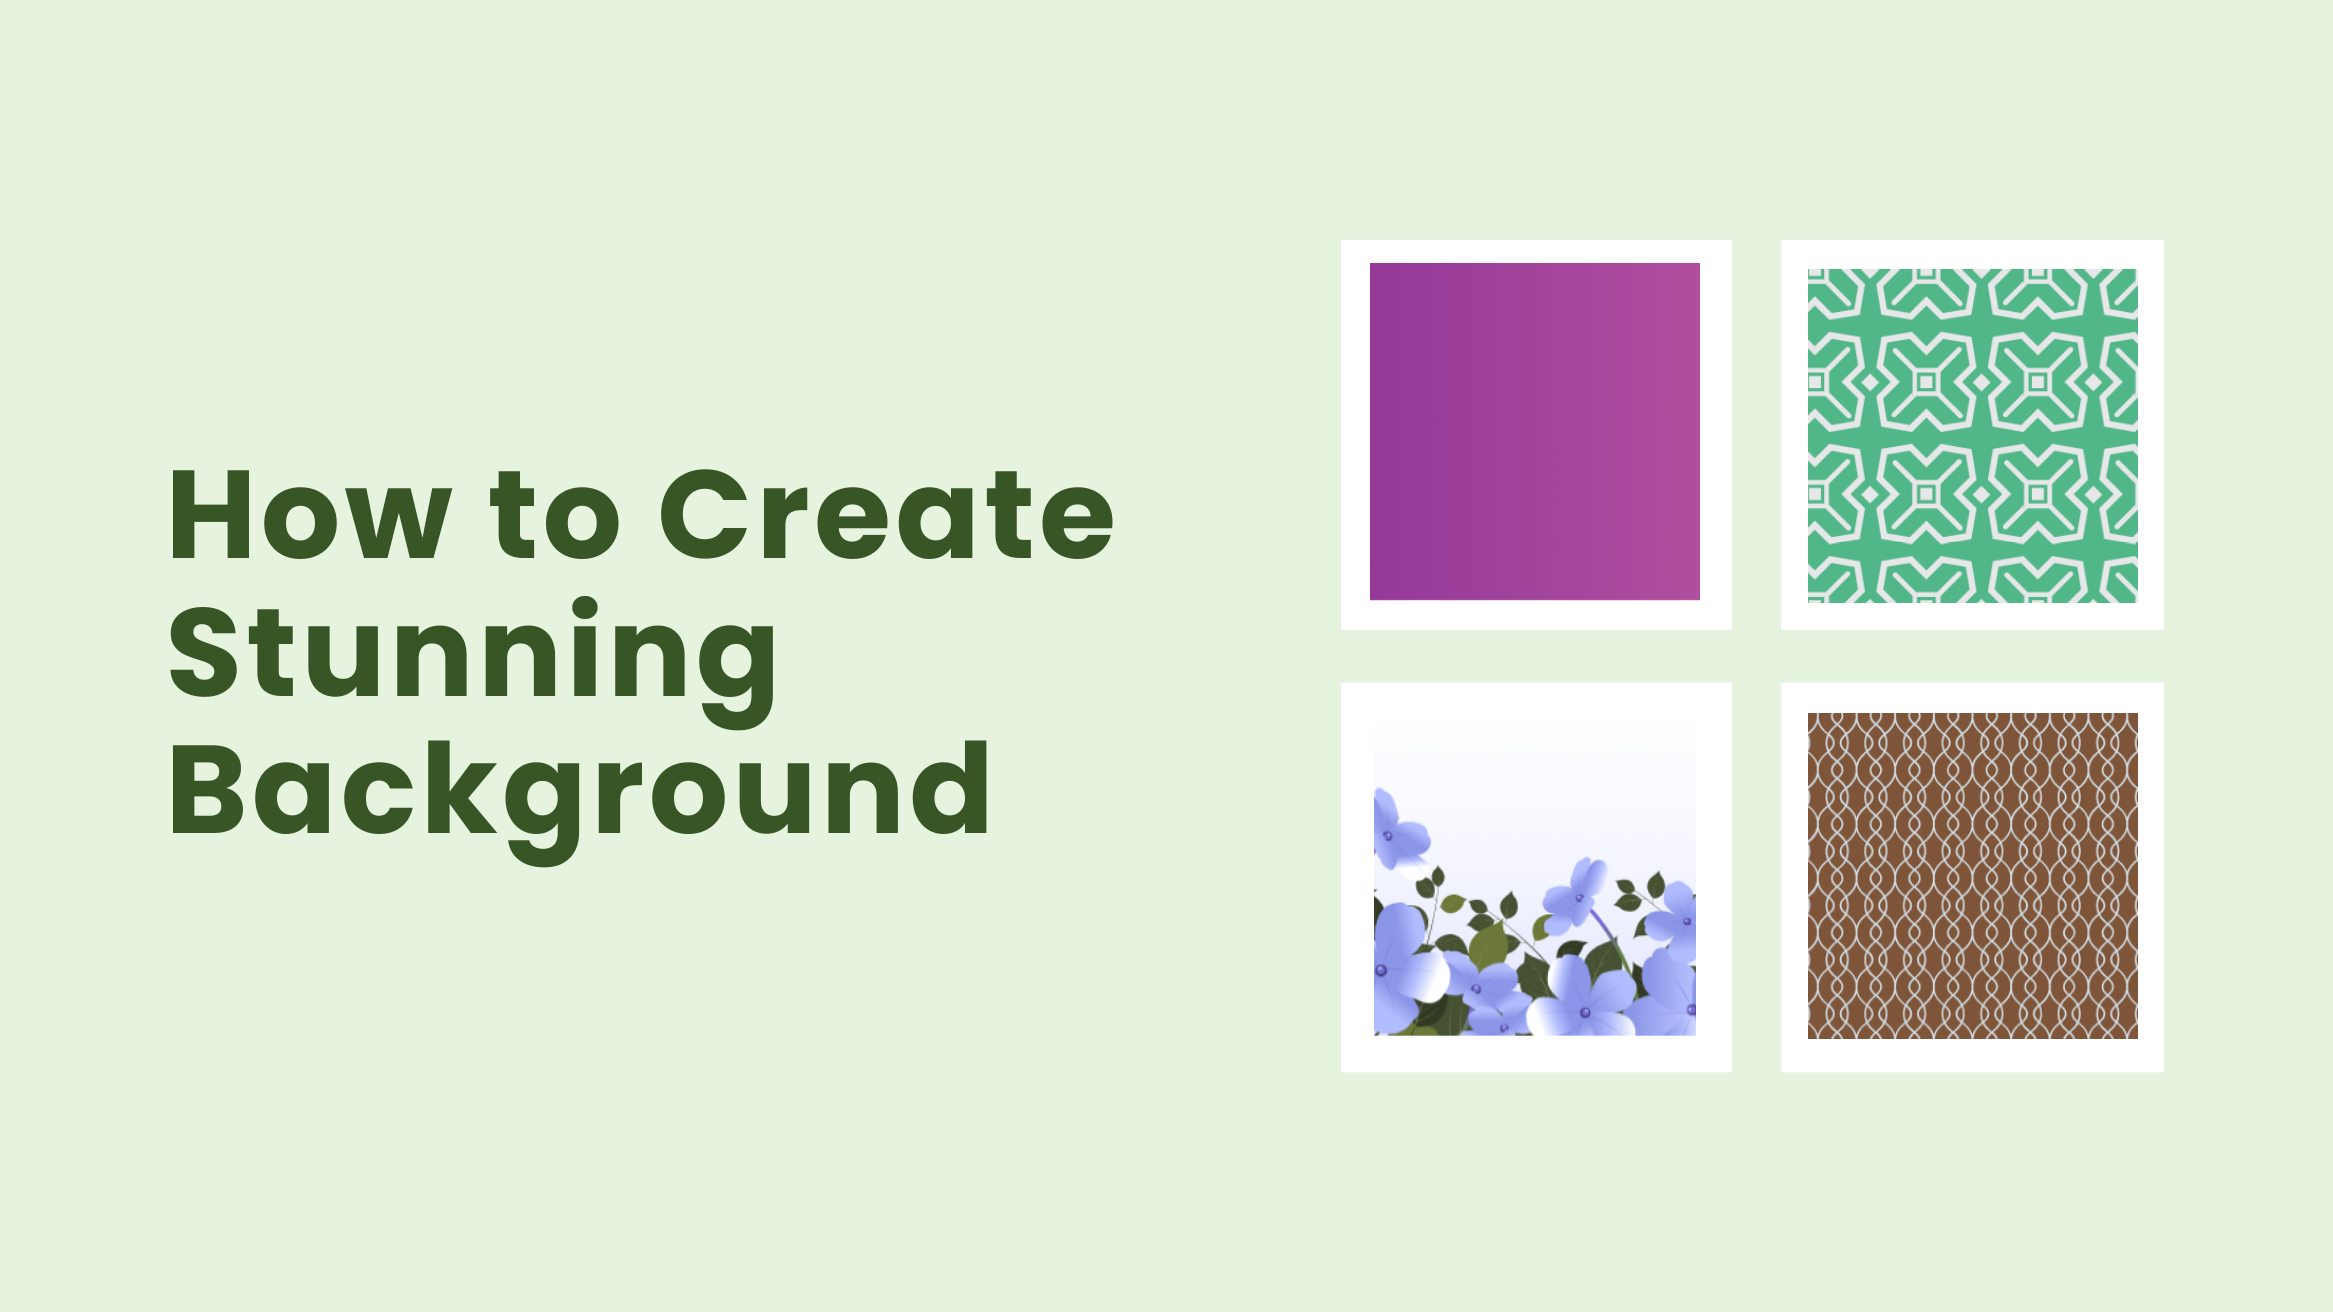 How to Create Stunning Background